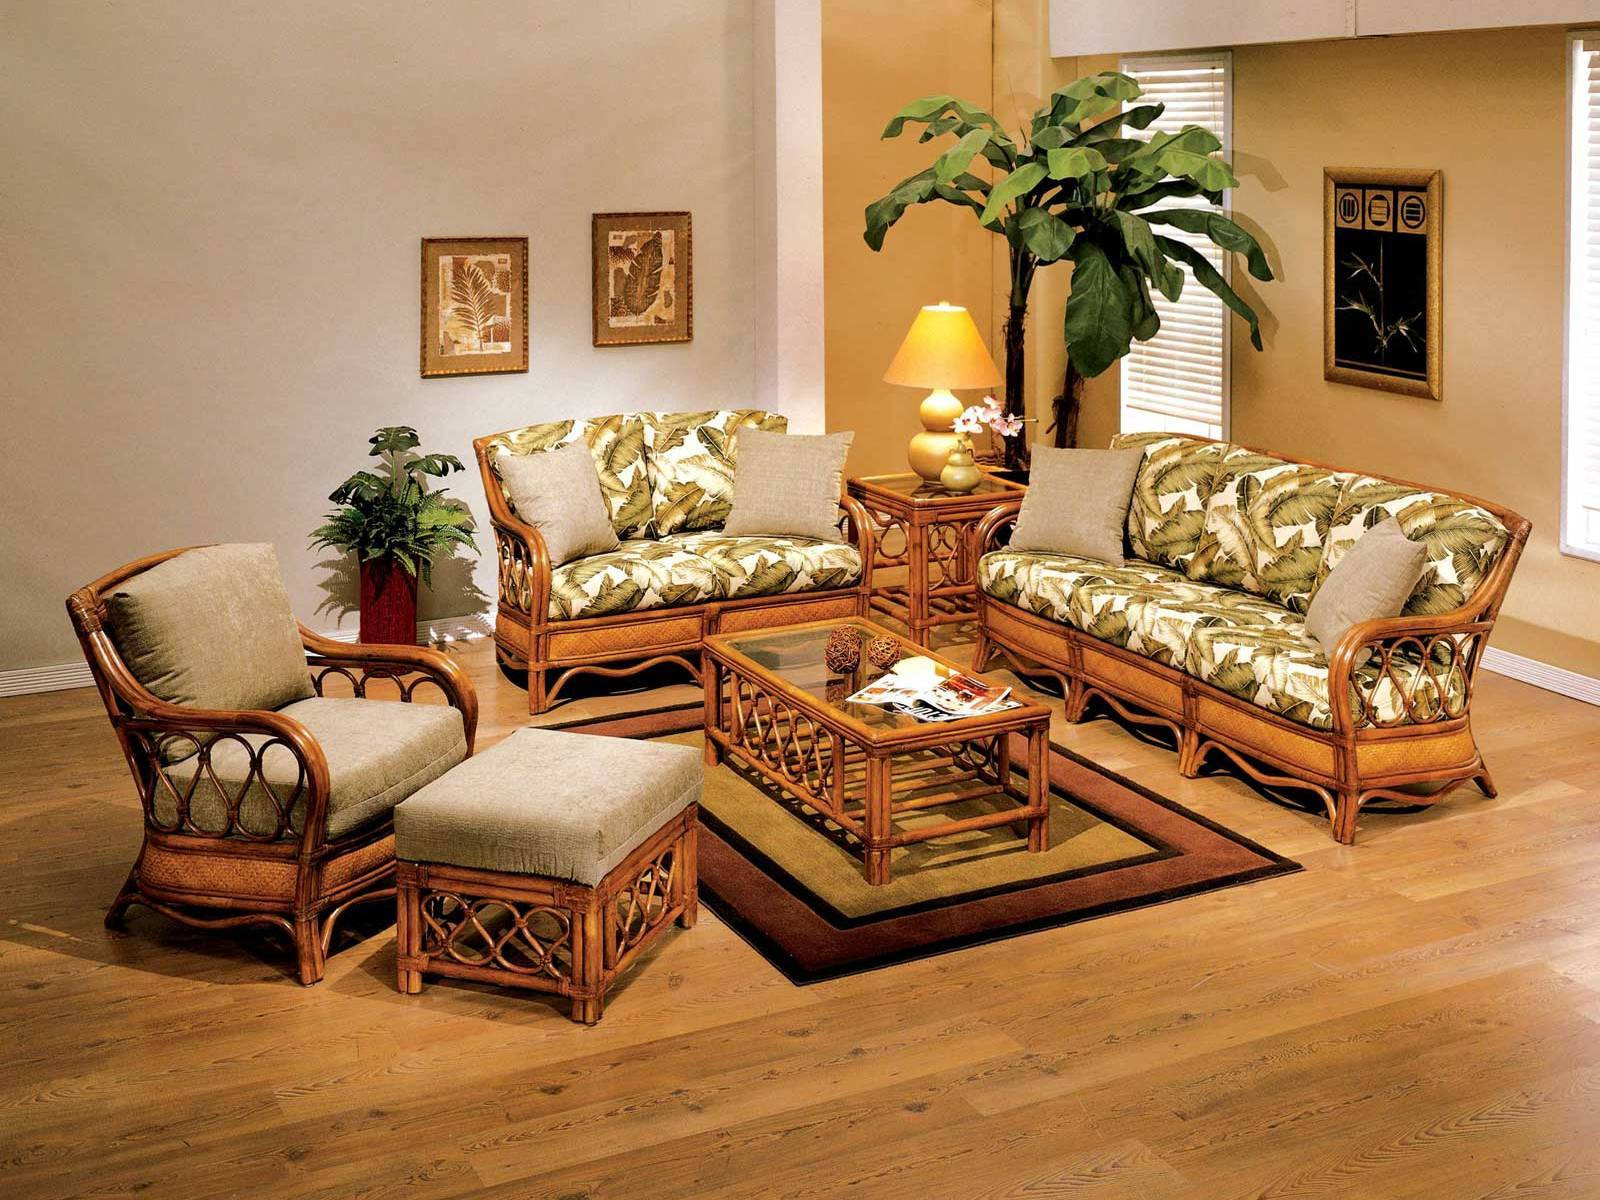 Wooden Chairs For Living Room
 27 Excellent Wood Living Room Furniture Examples